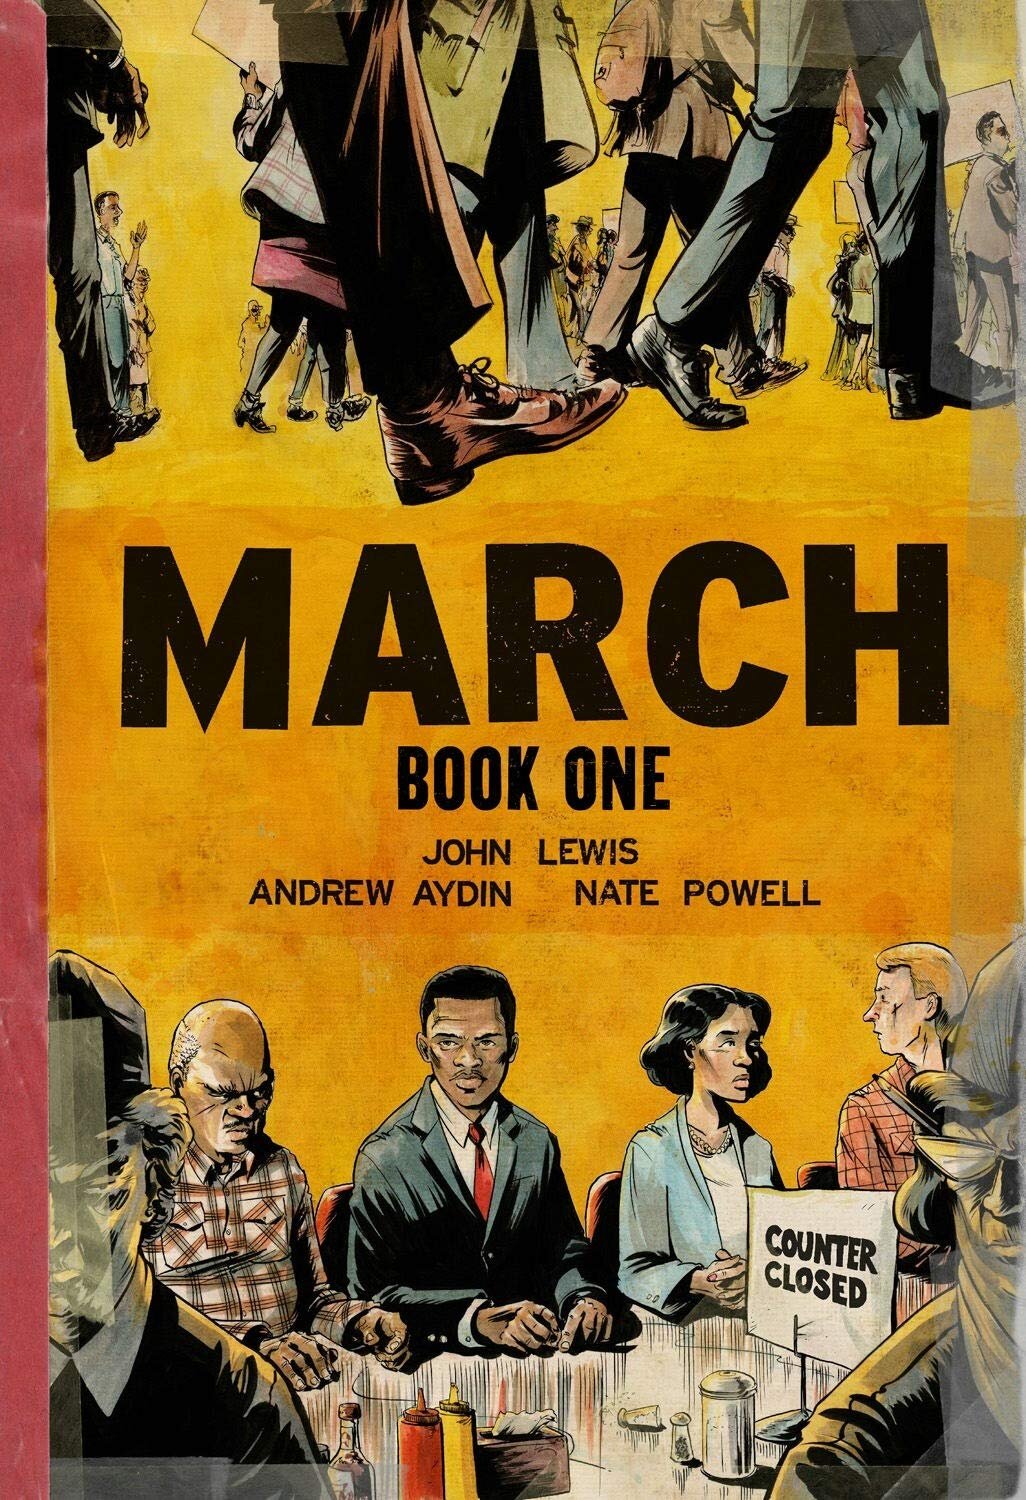 March: Book One by John Lewis, Andrew Aydin, Nate Powell